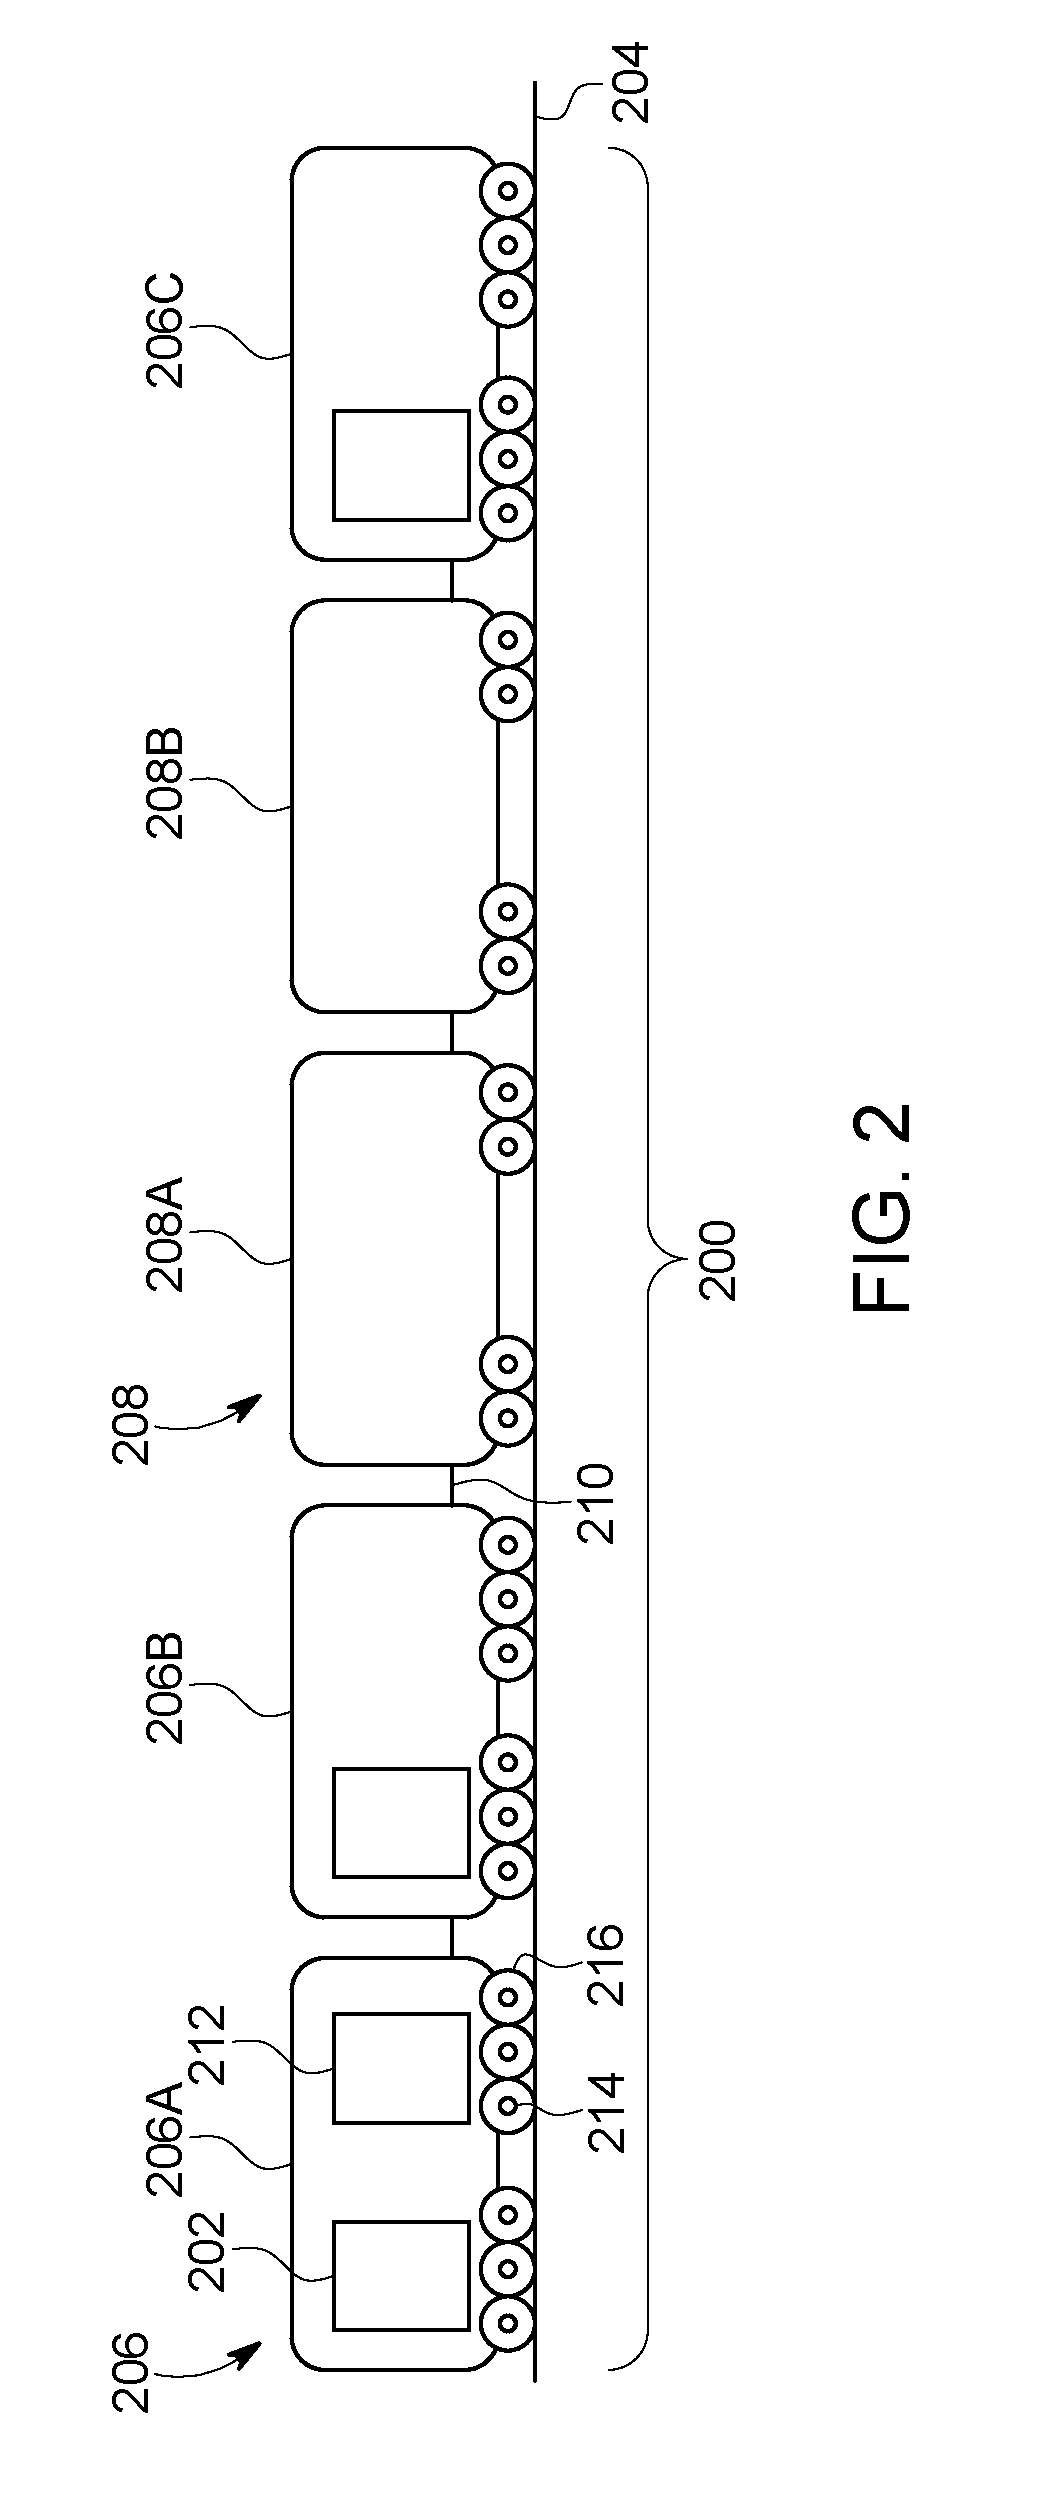 Vehicle control system and method